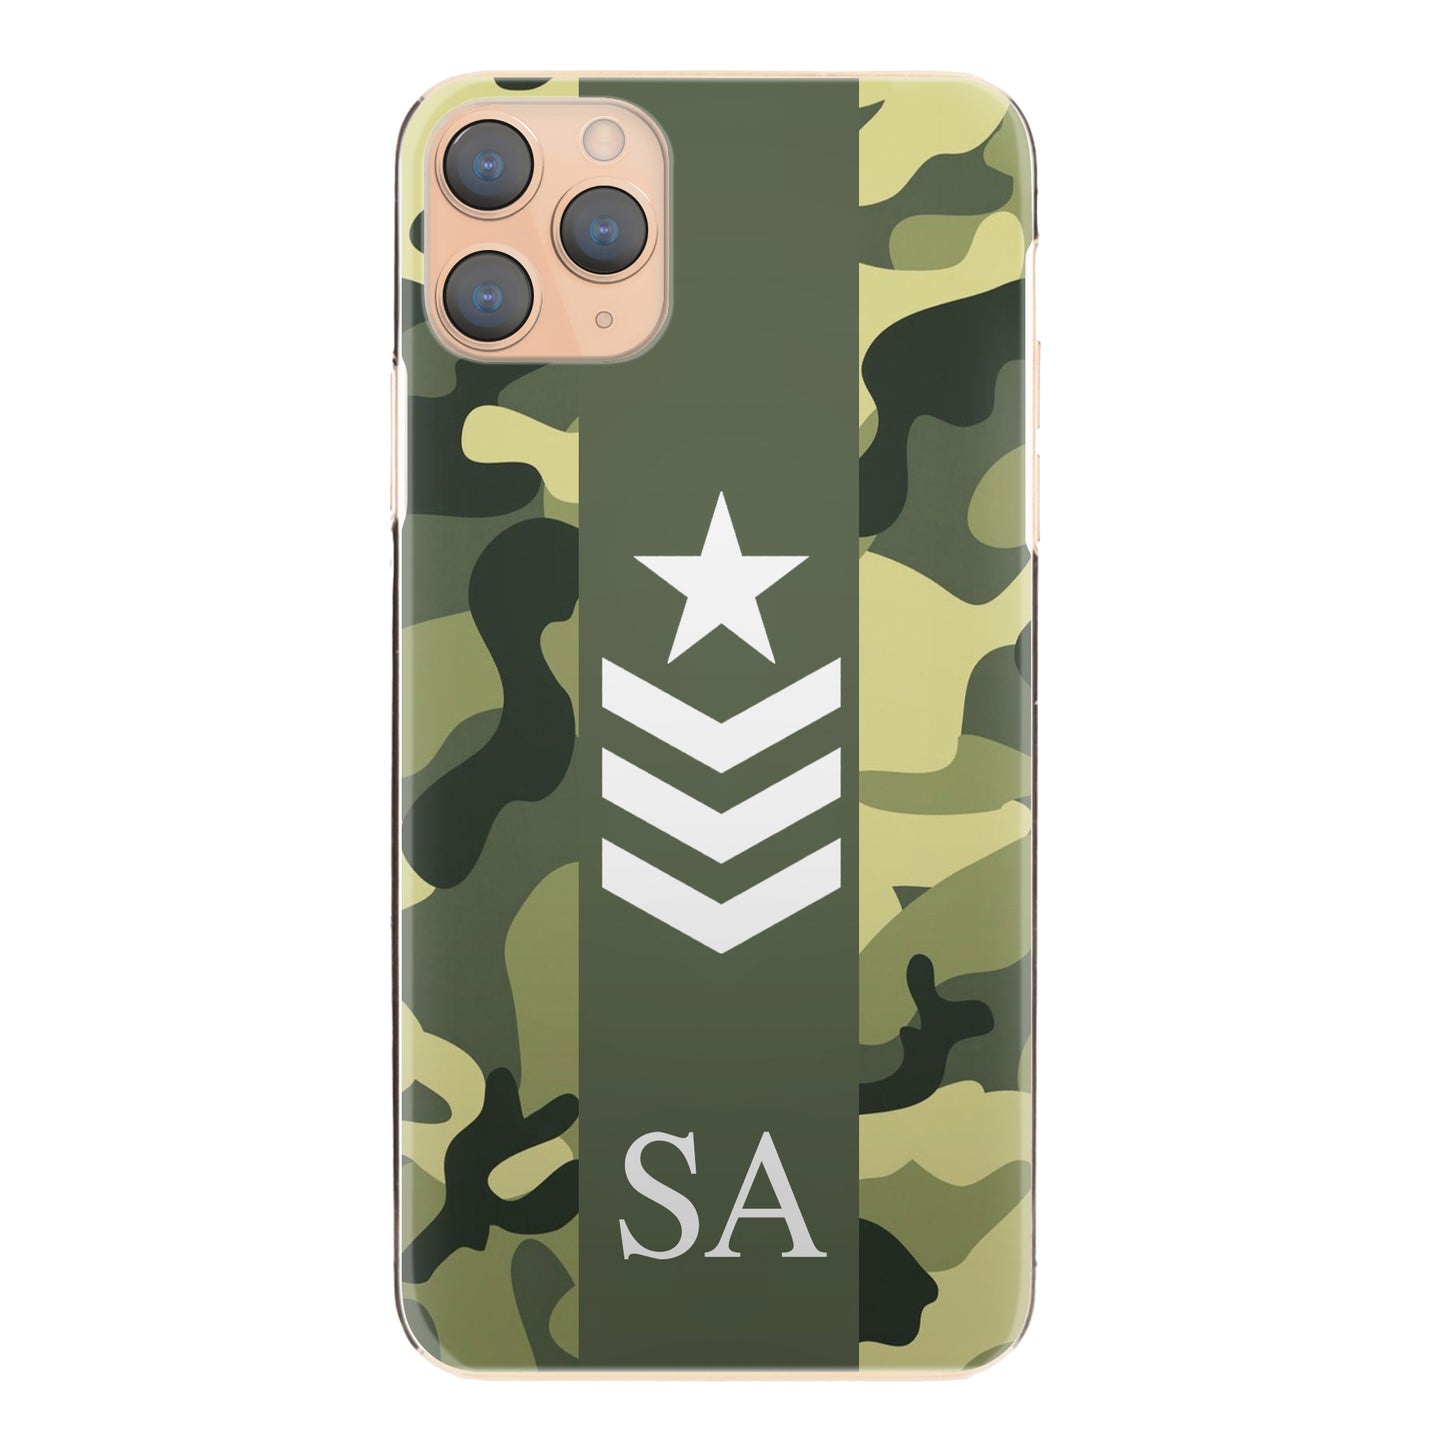 Personalised LG Phone Hard Case with Initials and Army Rank on Classic Green Camo